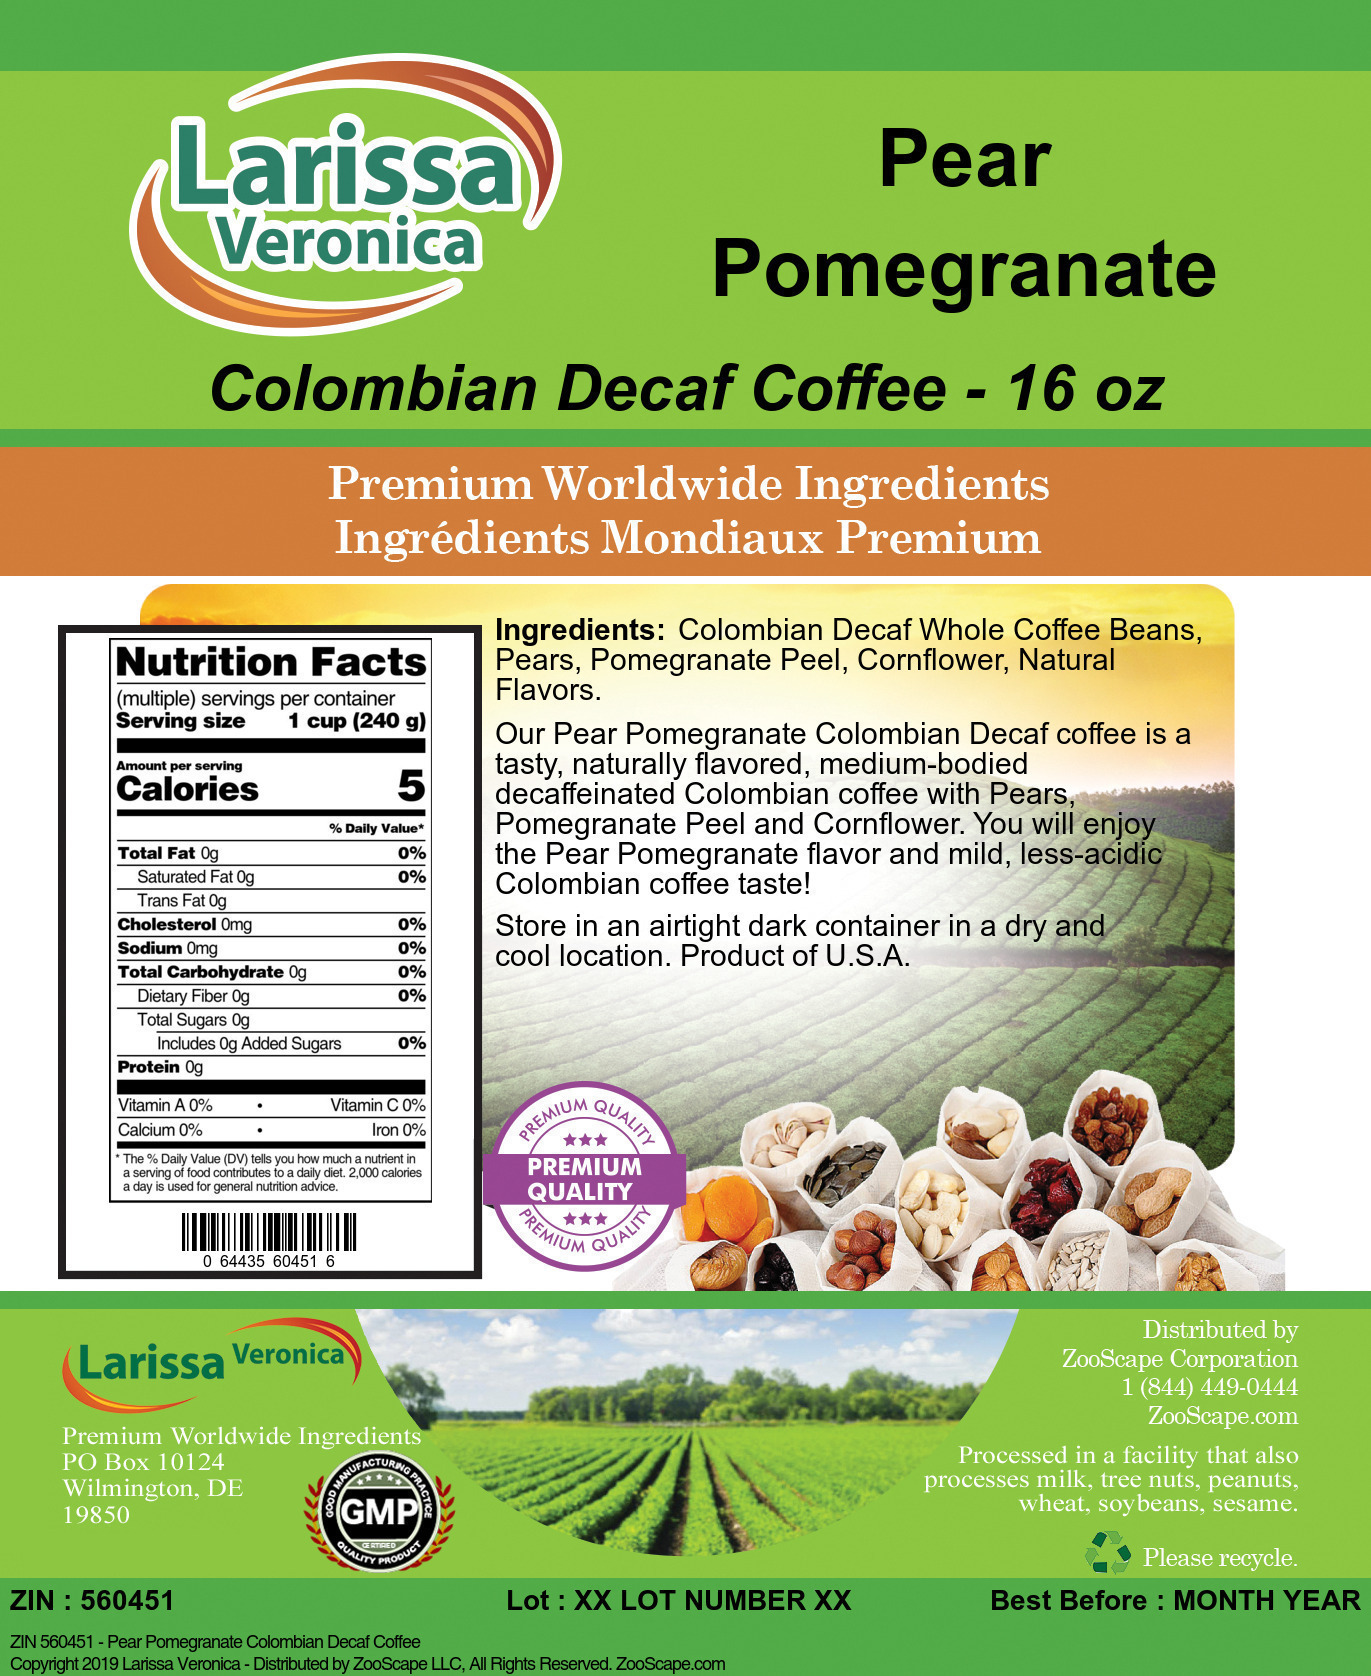 Pear Pomegranate Colombian Decaf Coffee - Label